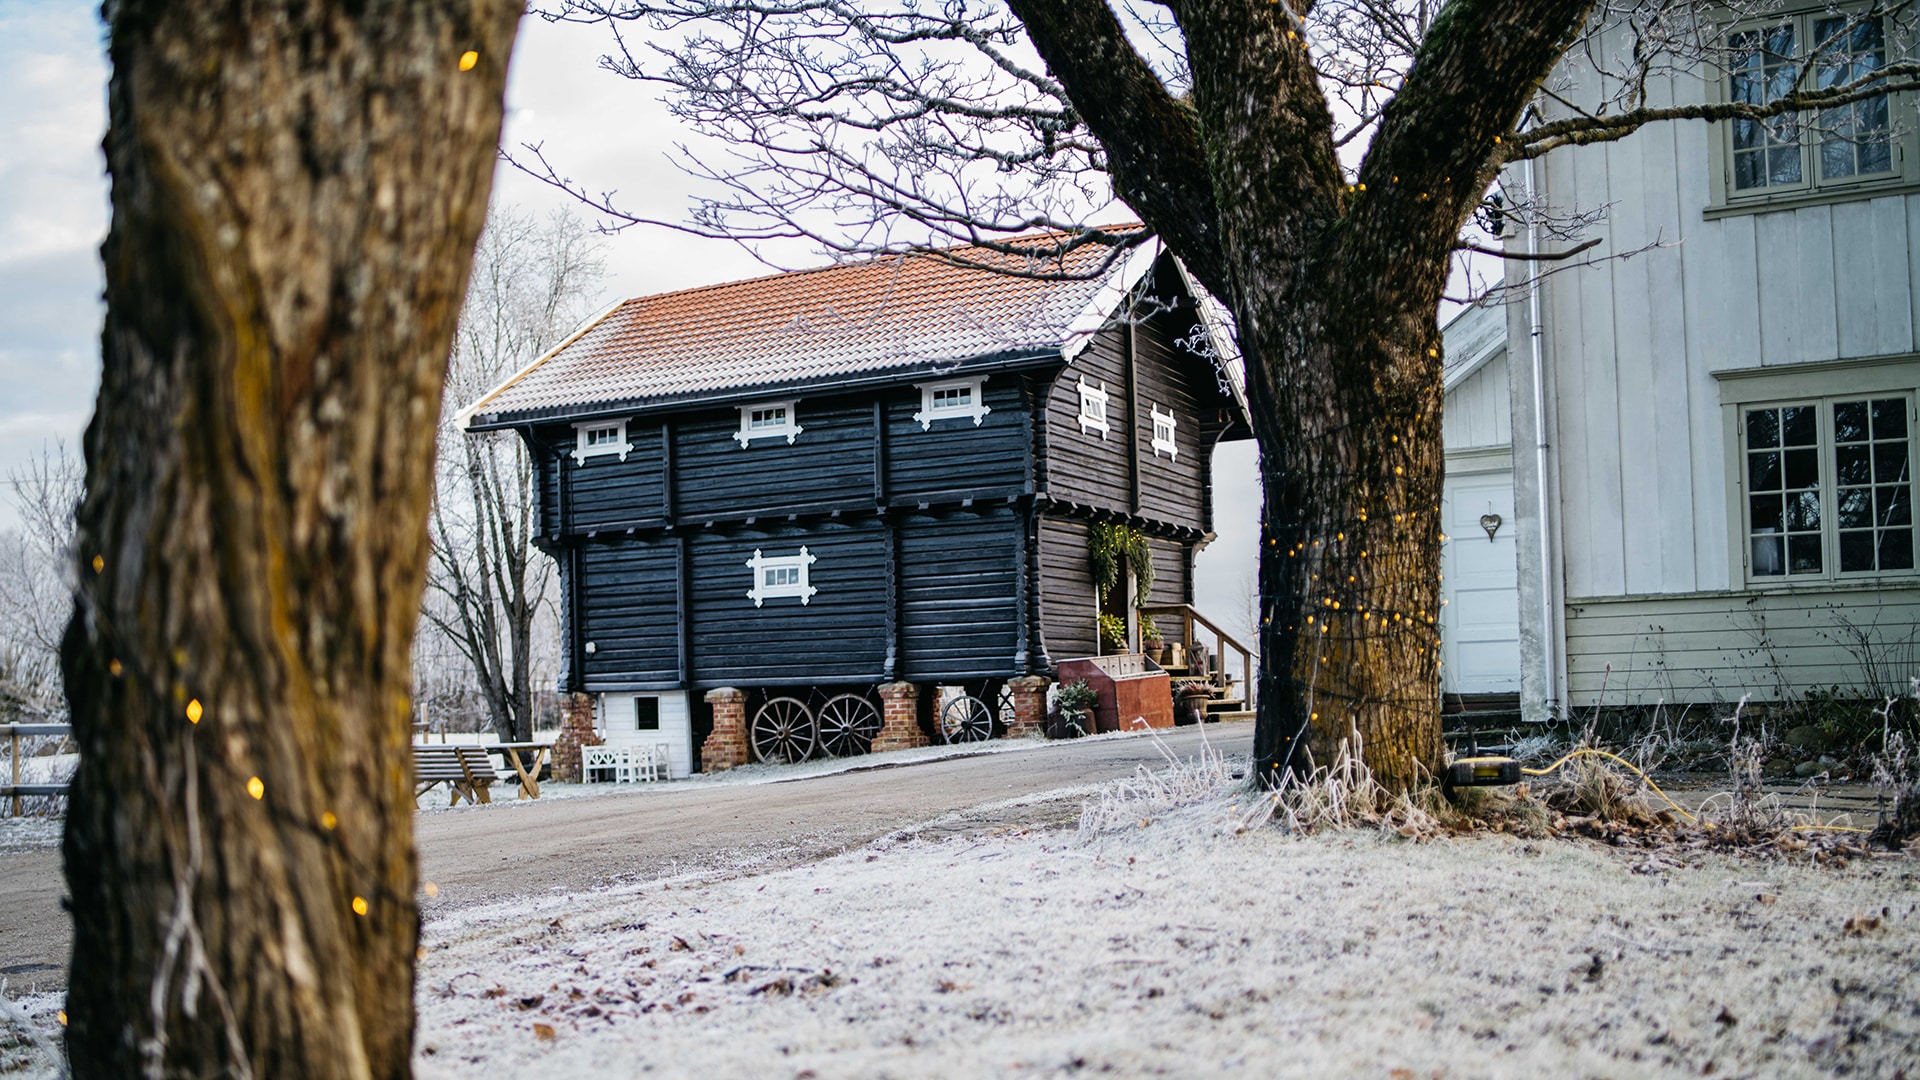 A laft building at farm Imset covered in frost.